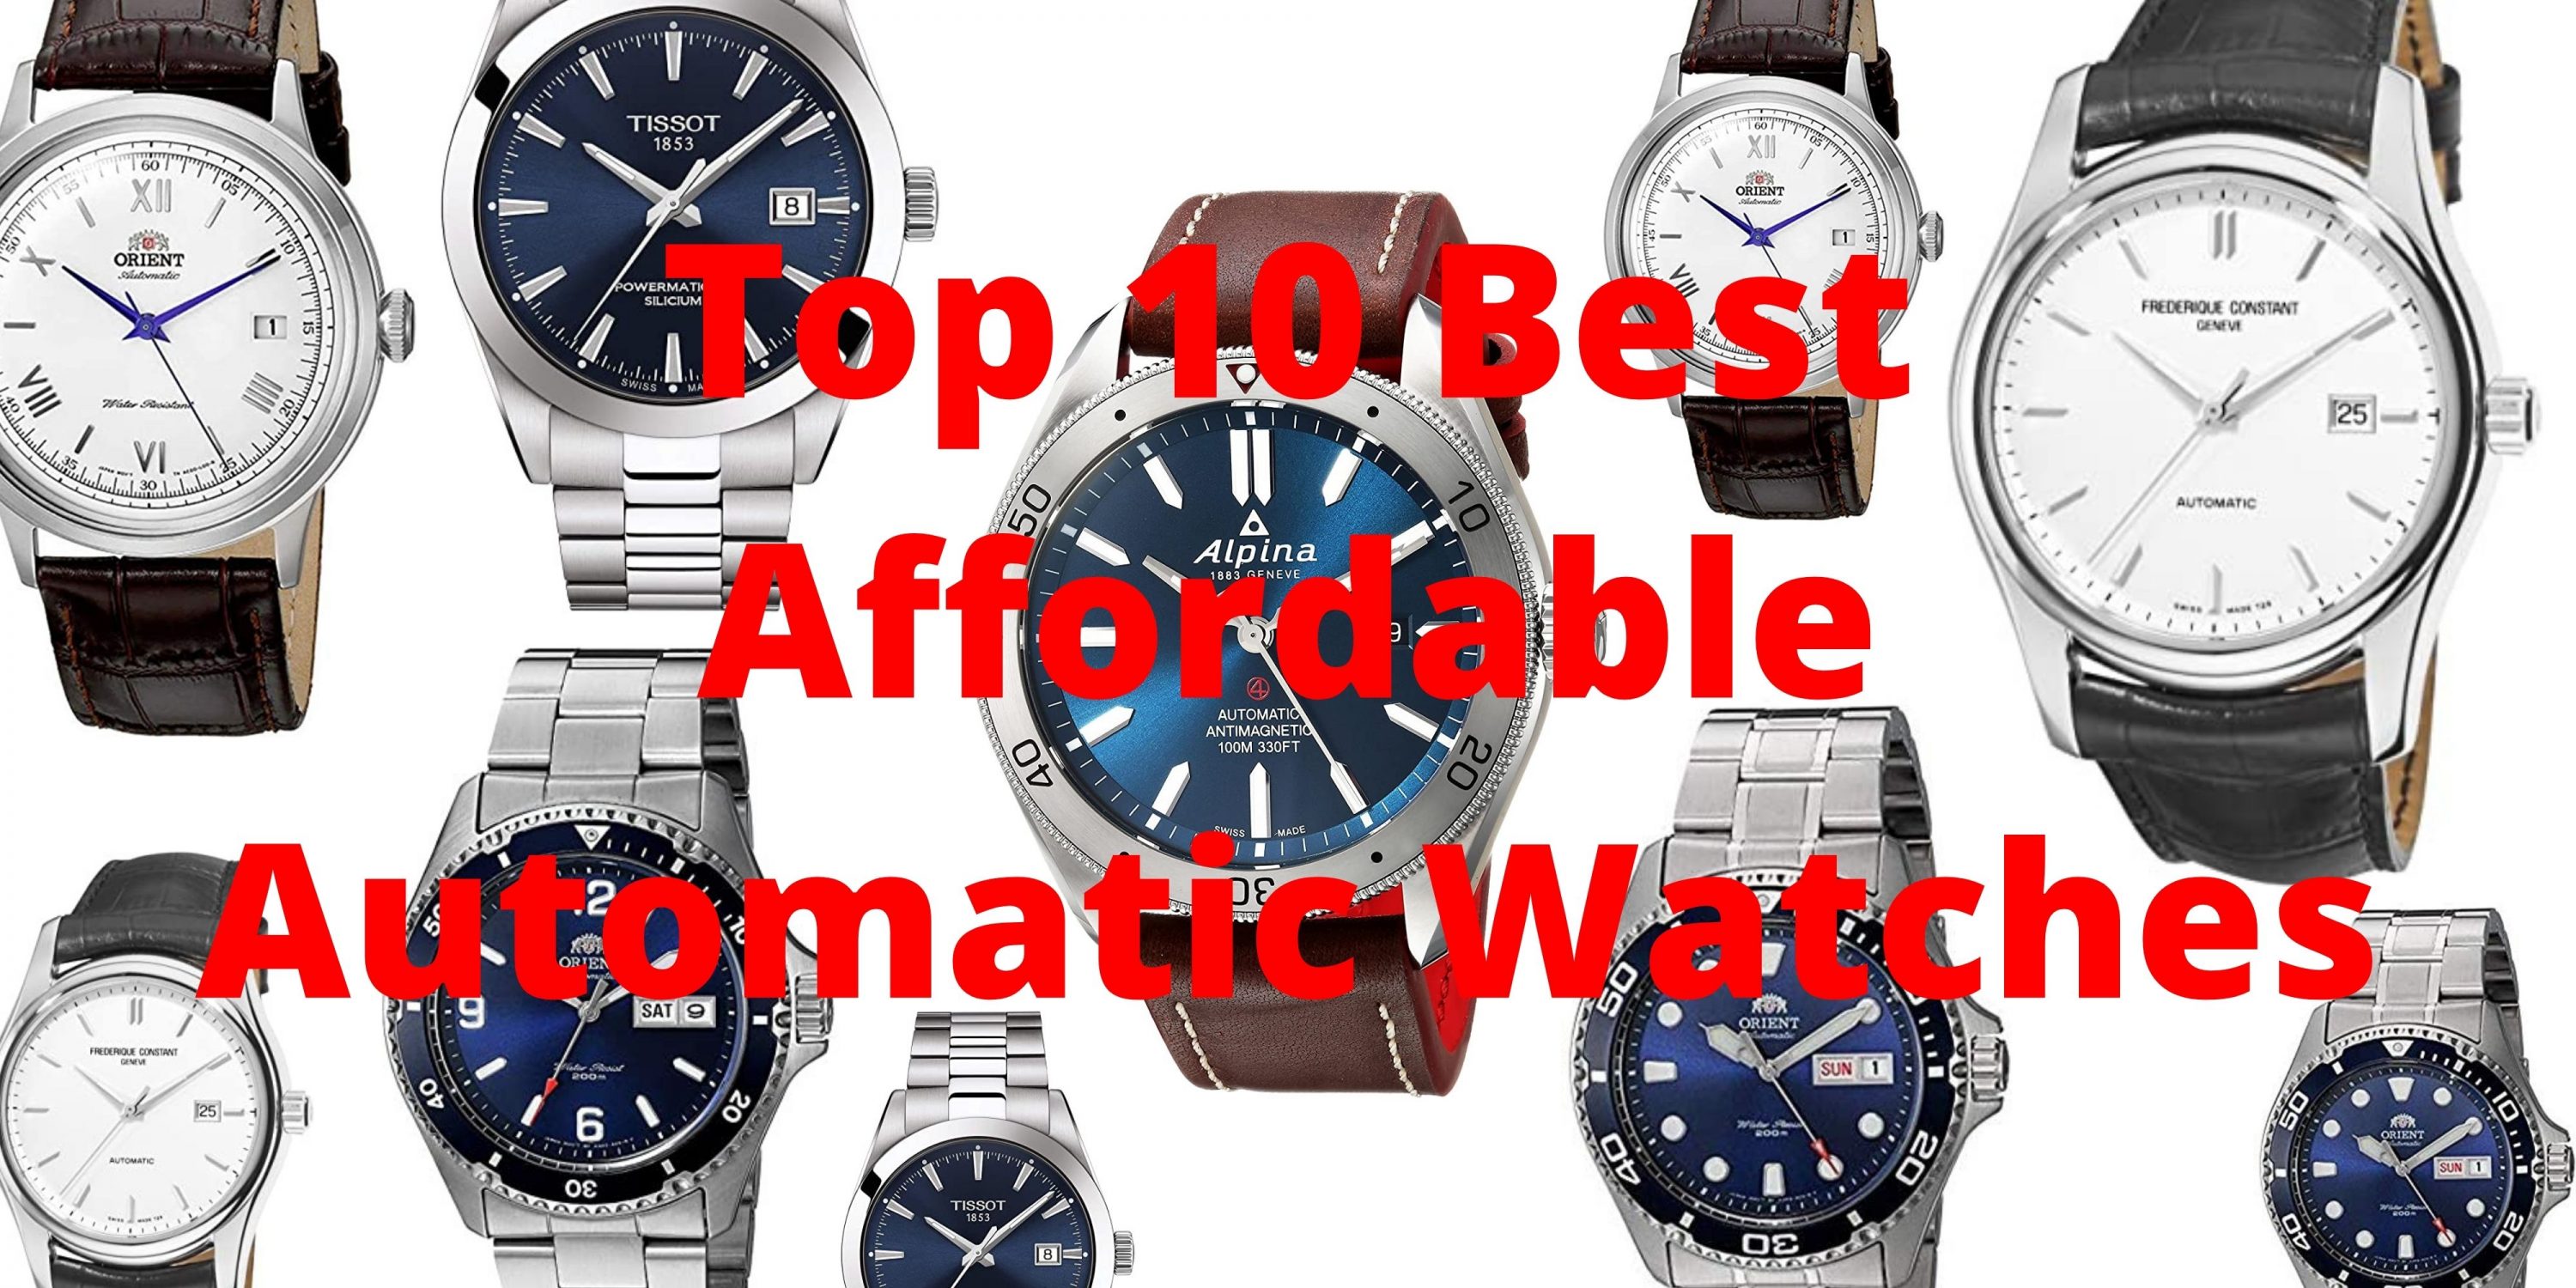 Top 10 Best Affordable Automatic Watches [List & Guide]